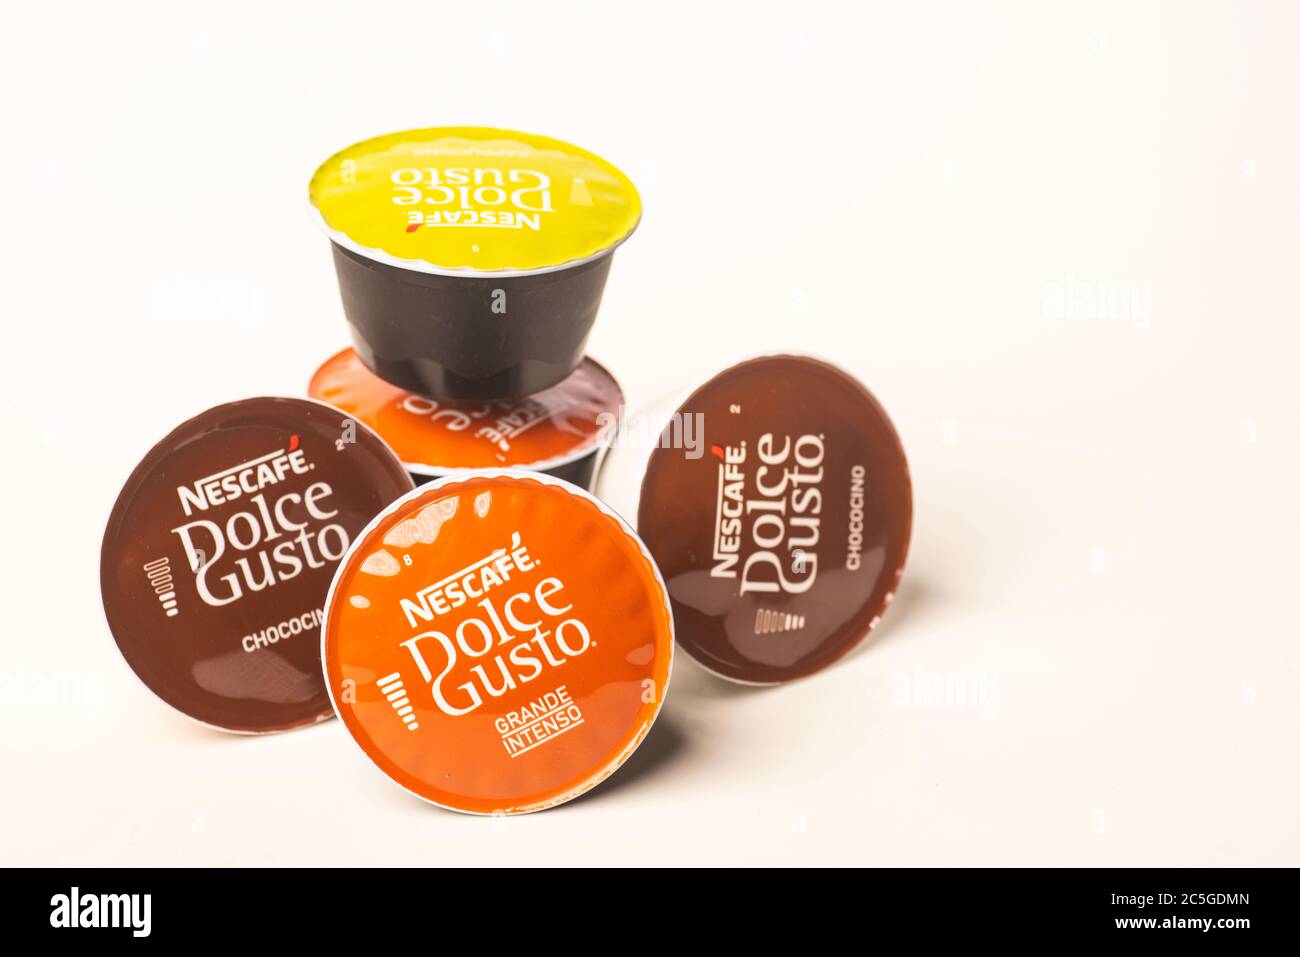 https://c8.alamy.com/comp/2C5GDMN/nescafe-dolce-gusto-coffee-capsules-isolated-against-white-2C5GDMN.jpg